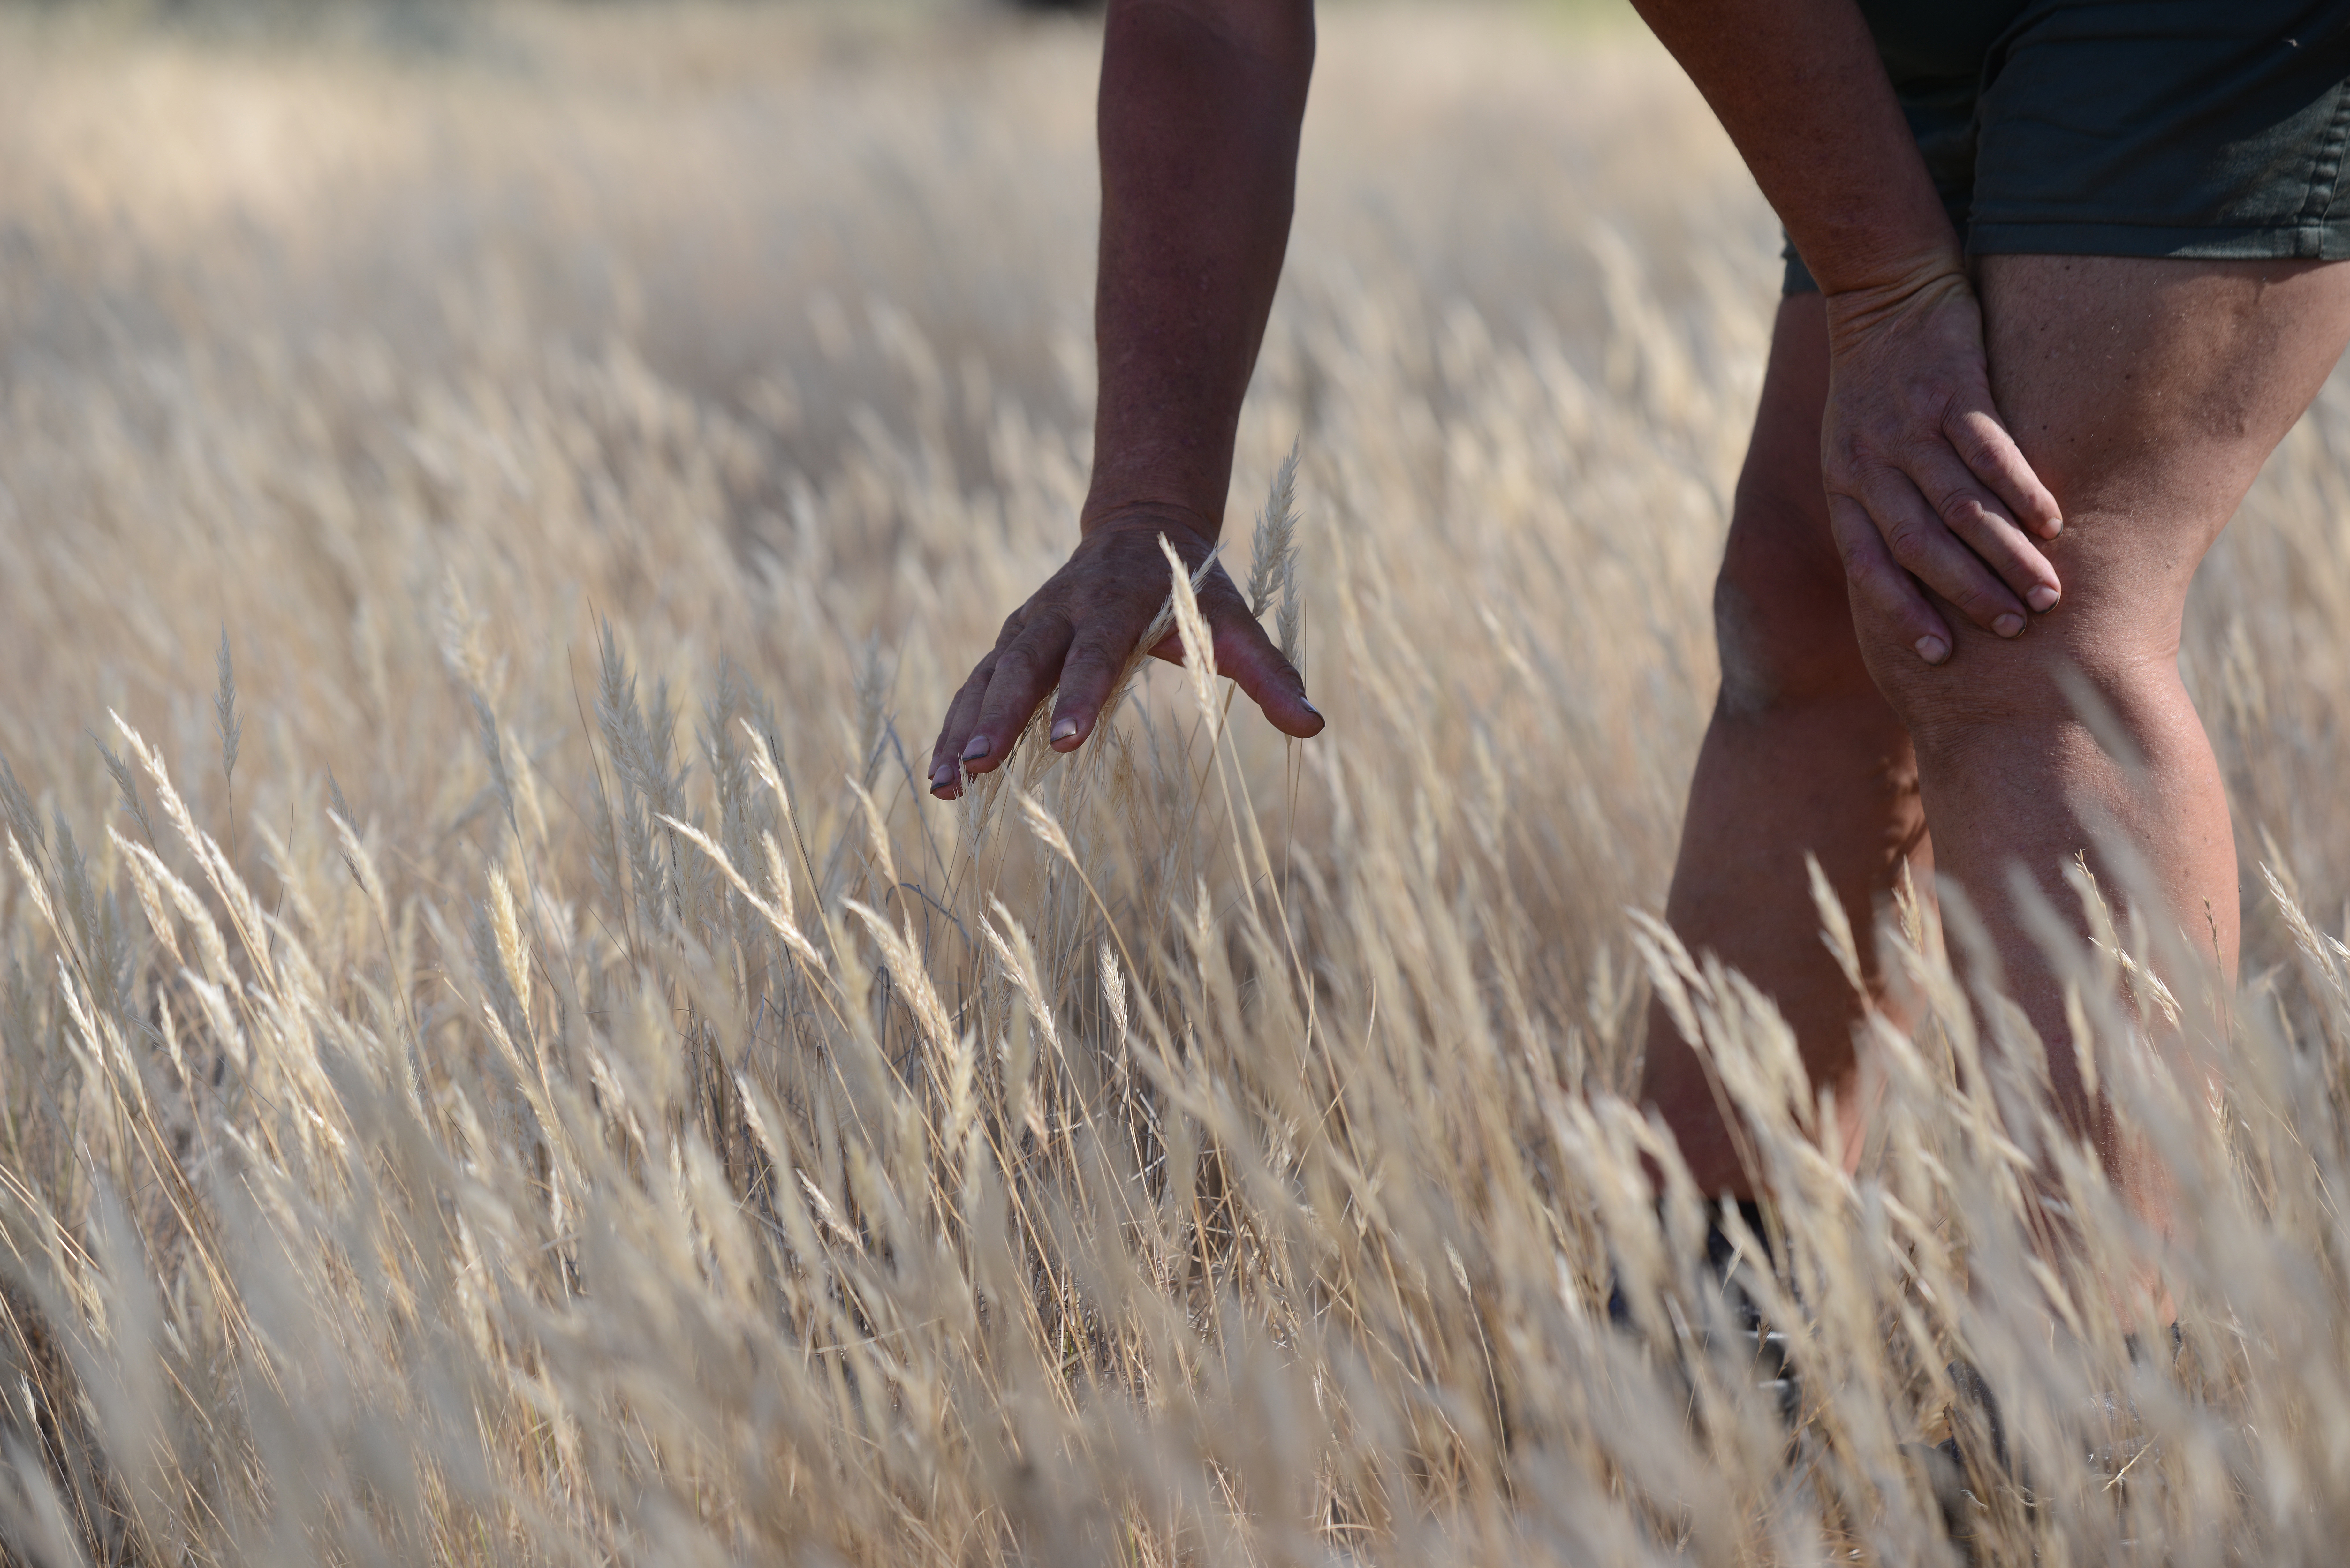 A hand on the danthonia. Image source: Kilter Rural